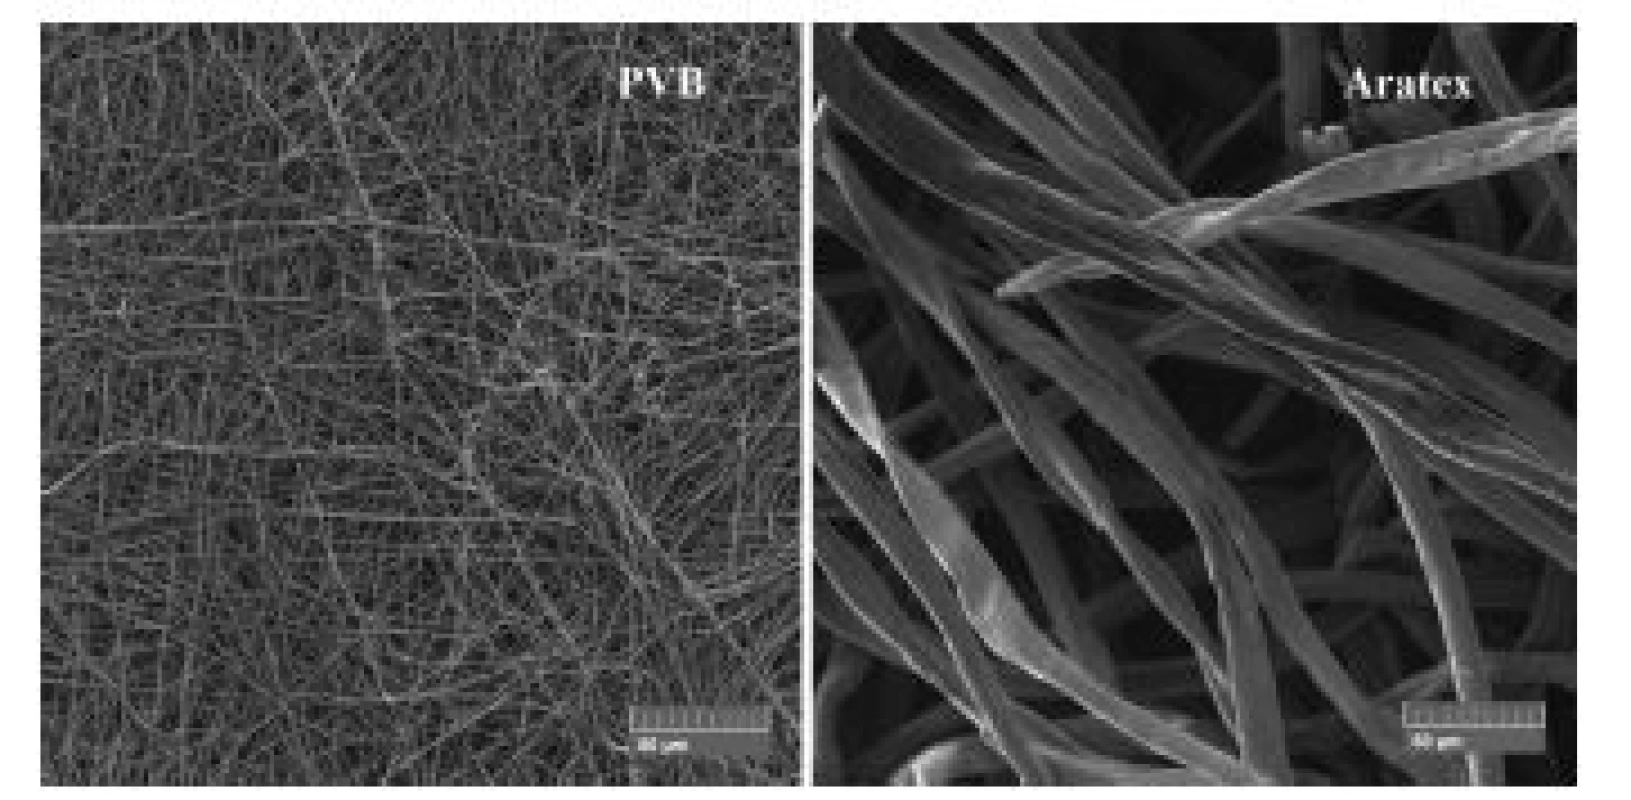 SEM images comparison of Aratex and PVB scent carrier morphology with the same magnification.